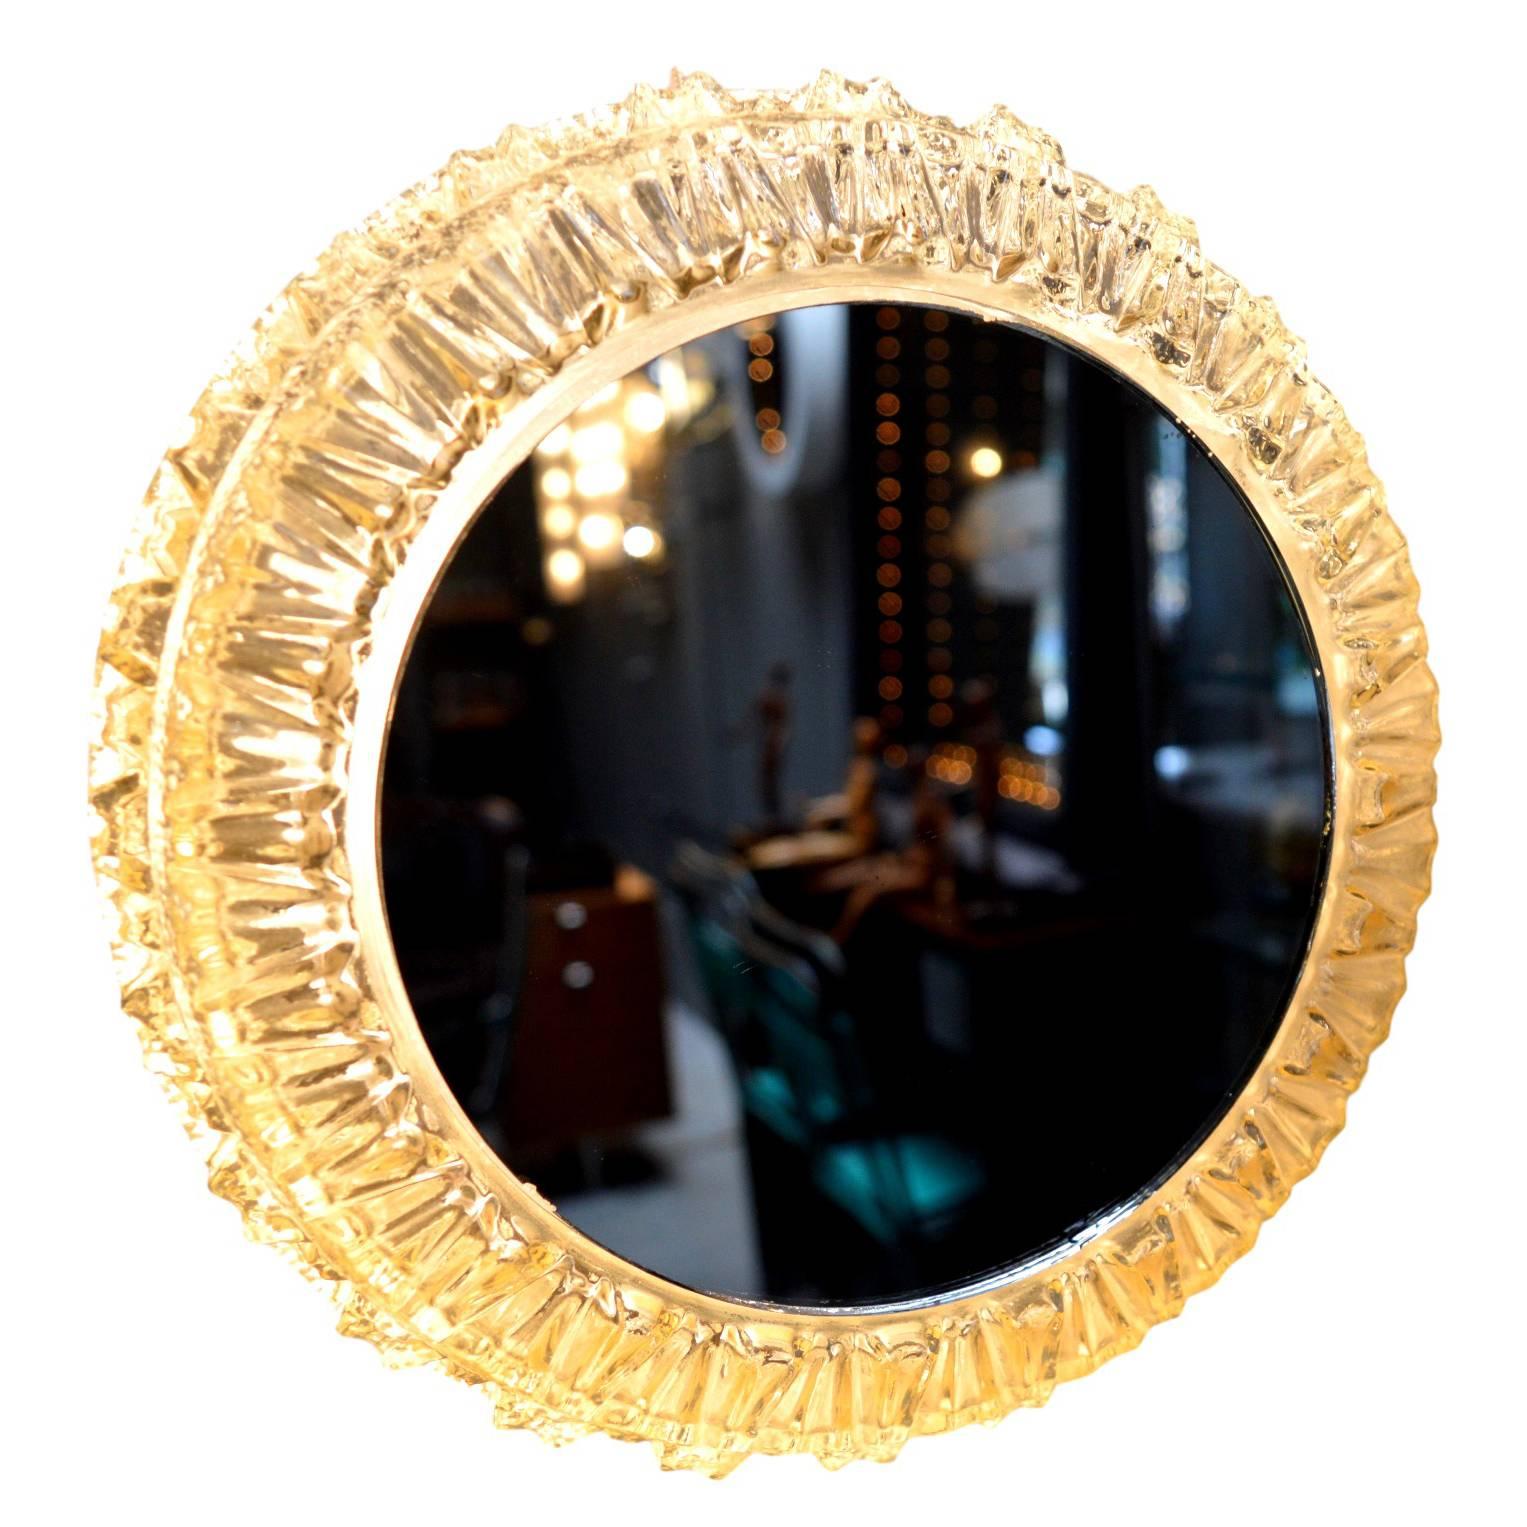 Gorgeous German illuminated mirror. Faceted glass with inset round mirror. Newly rewired. Excellent vintage condition. Great wall mirror or flush mount.